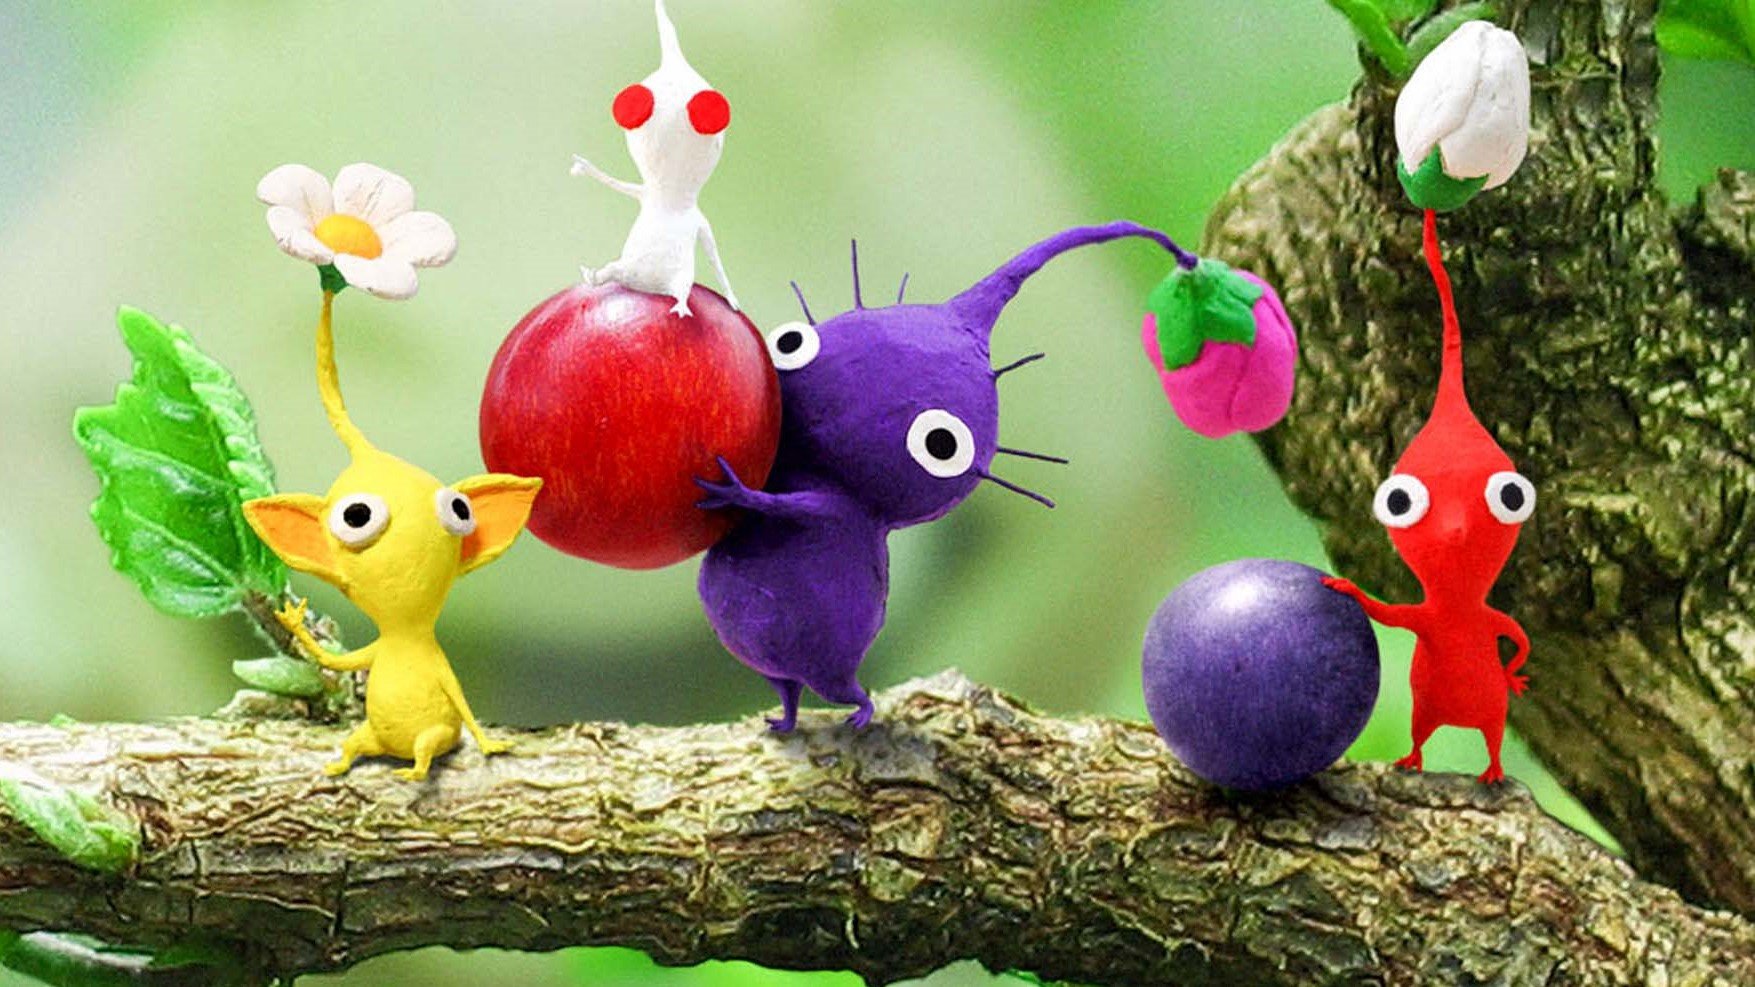 will there be a pikmin 4